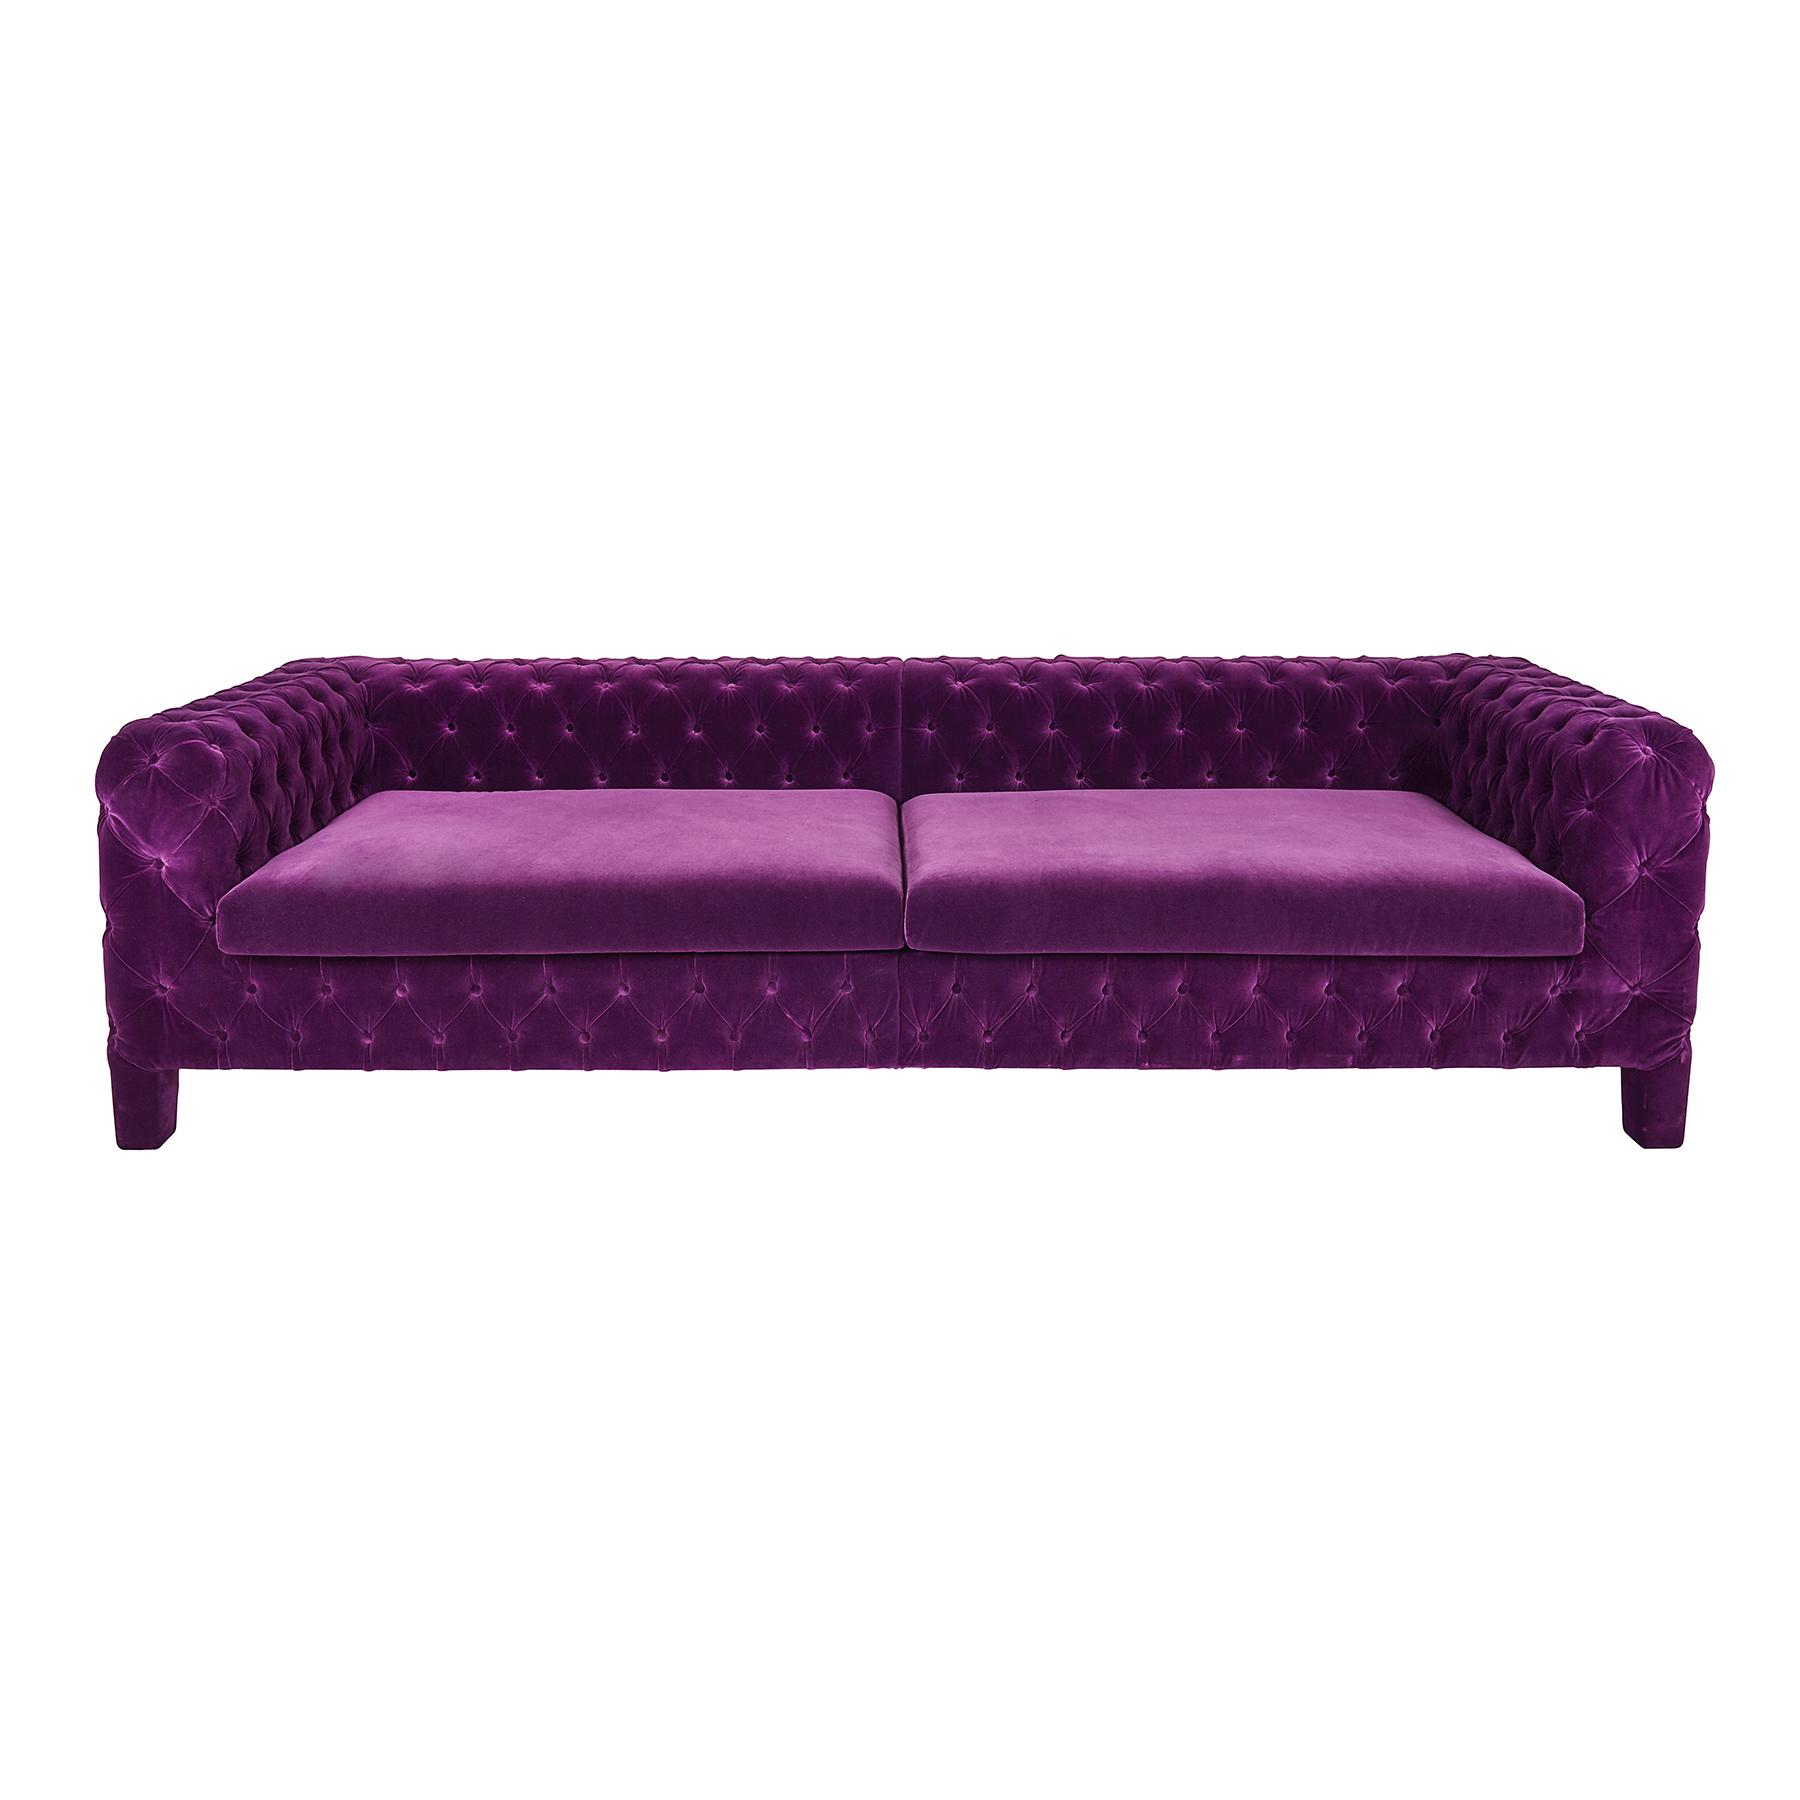 Harishi Buttoned Sofa | Quality By Design